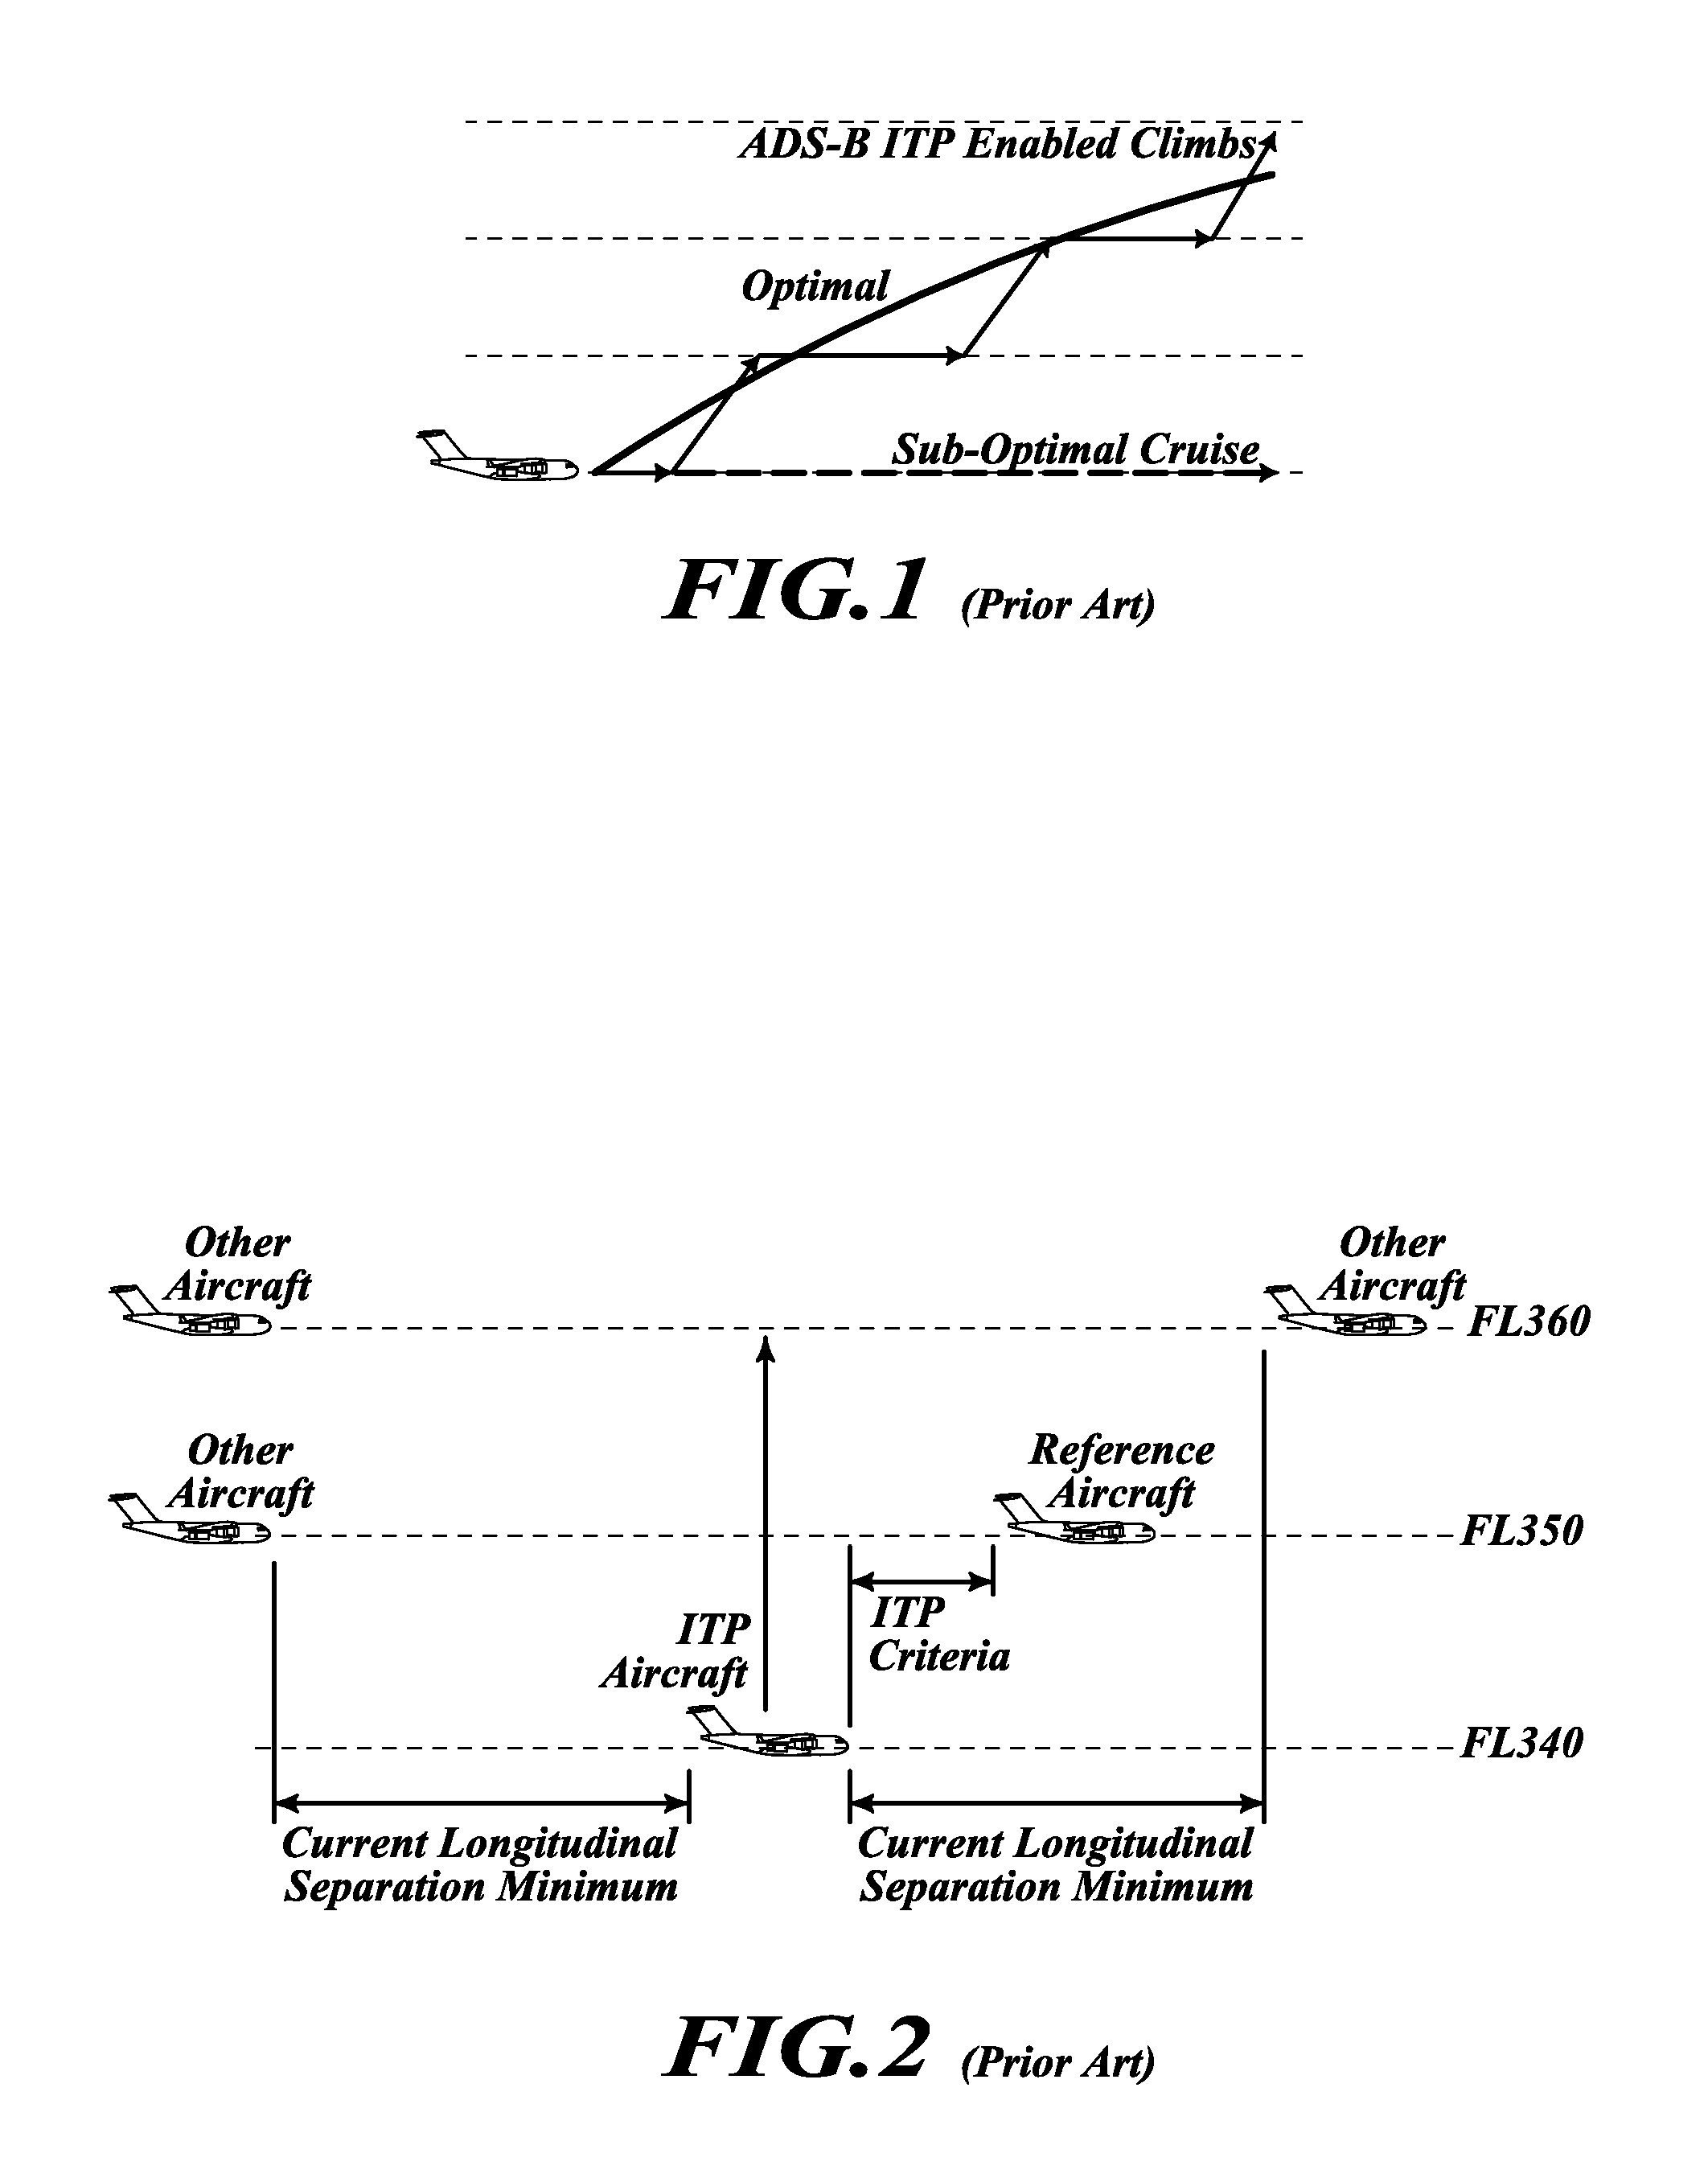 Methods and systems for presenting weather hazard information on an in-trail procedures display